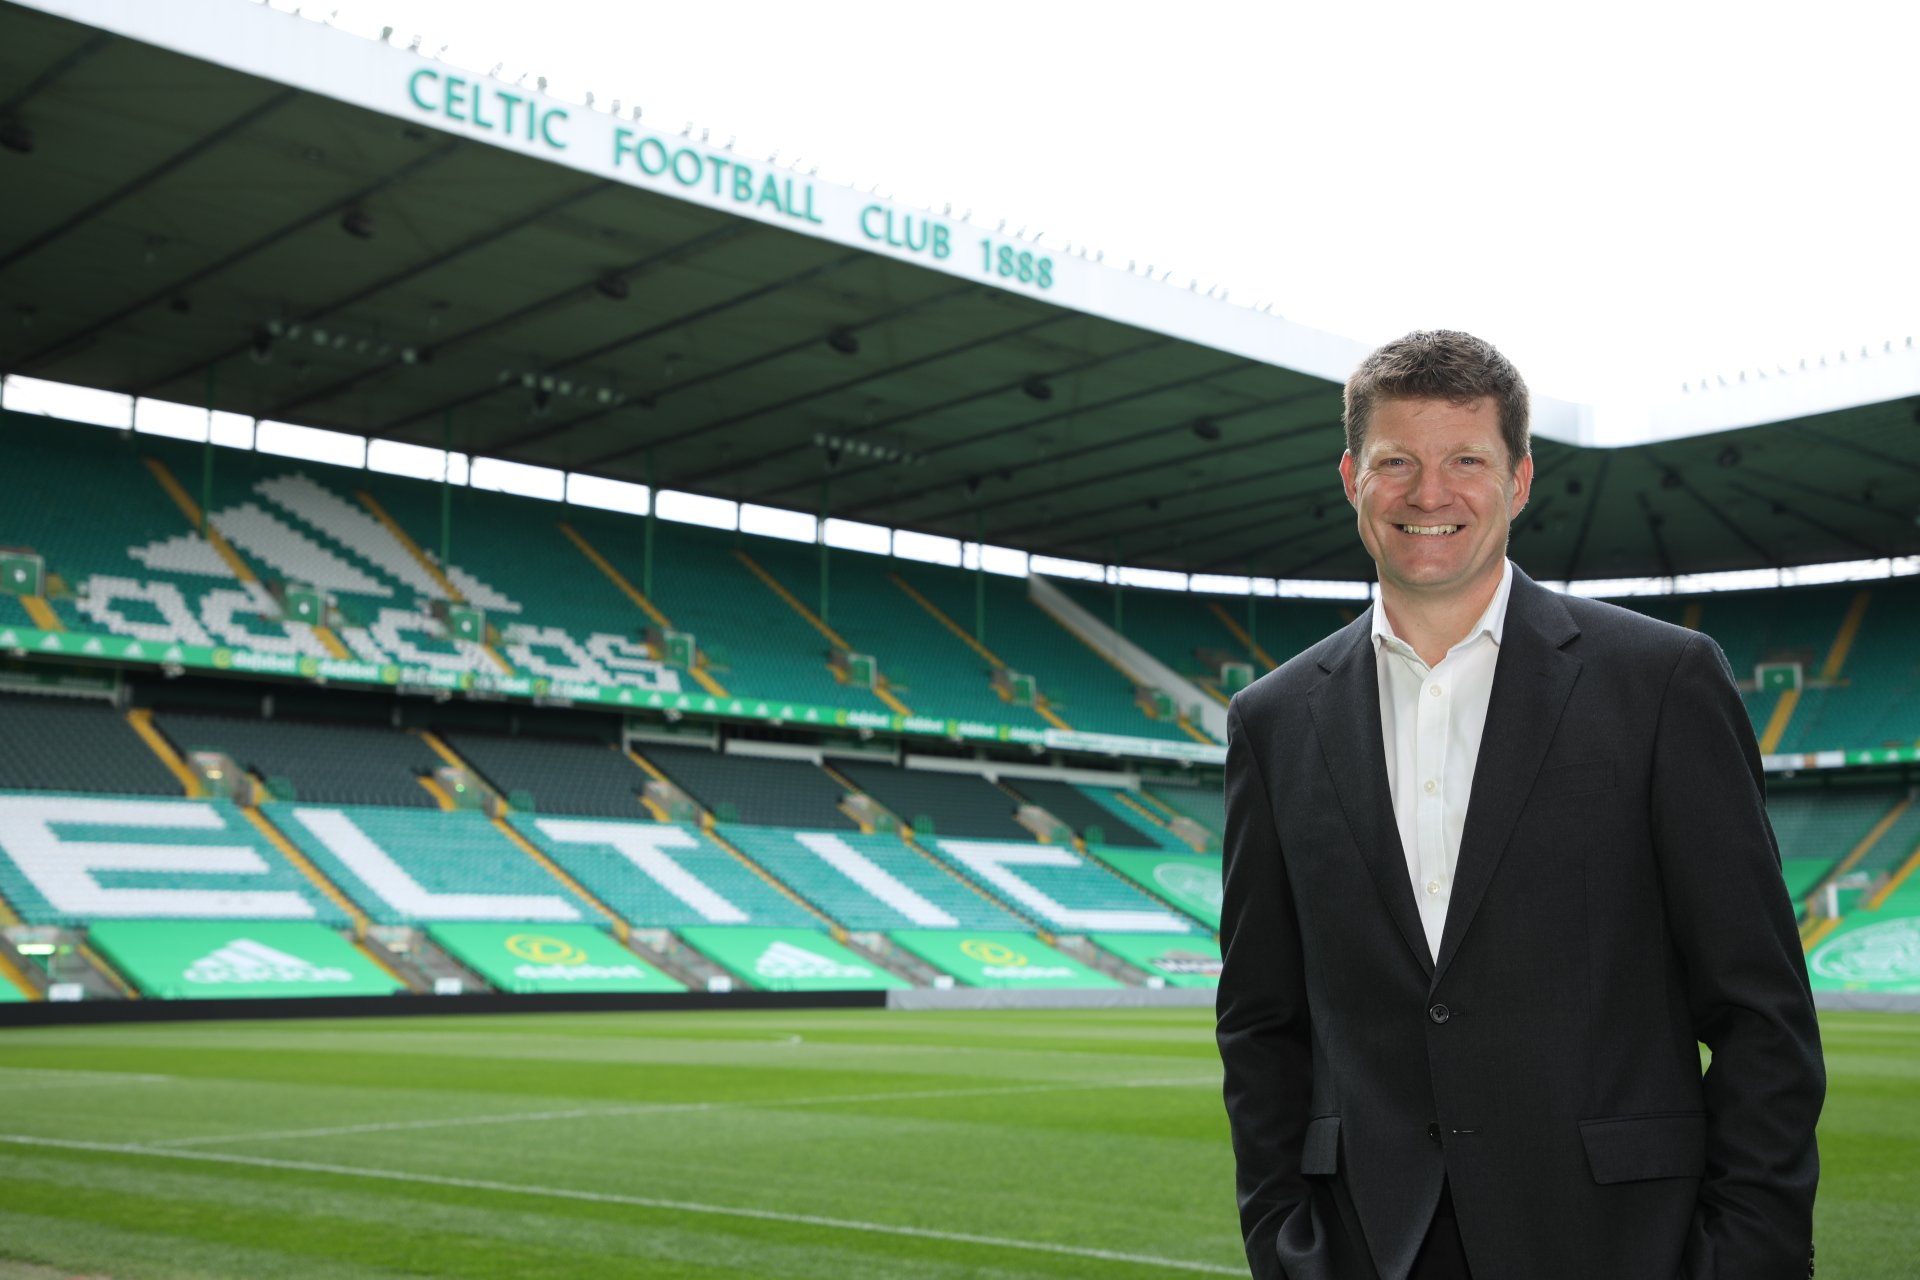 "Let's become World Class"; Dom McKay sets ambition for new Celtic structure after fan grilling